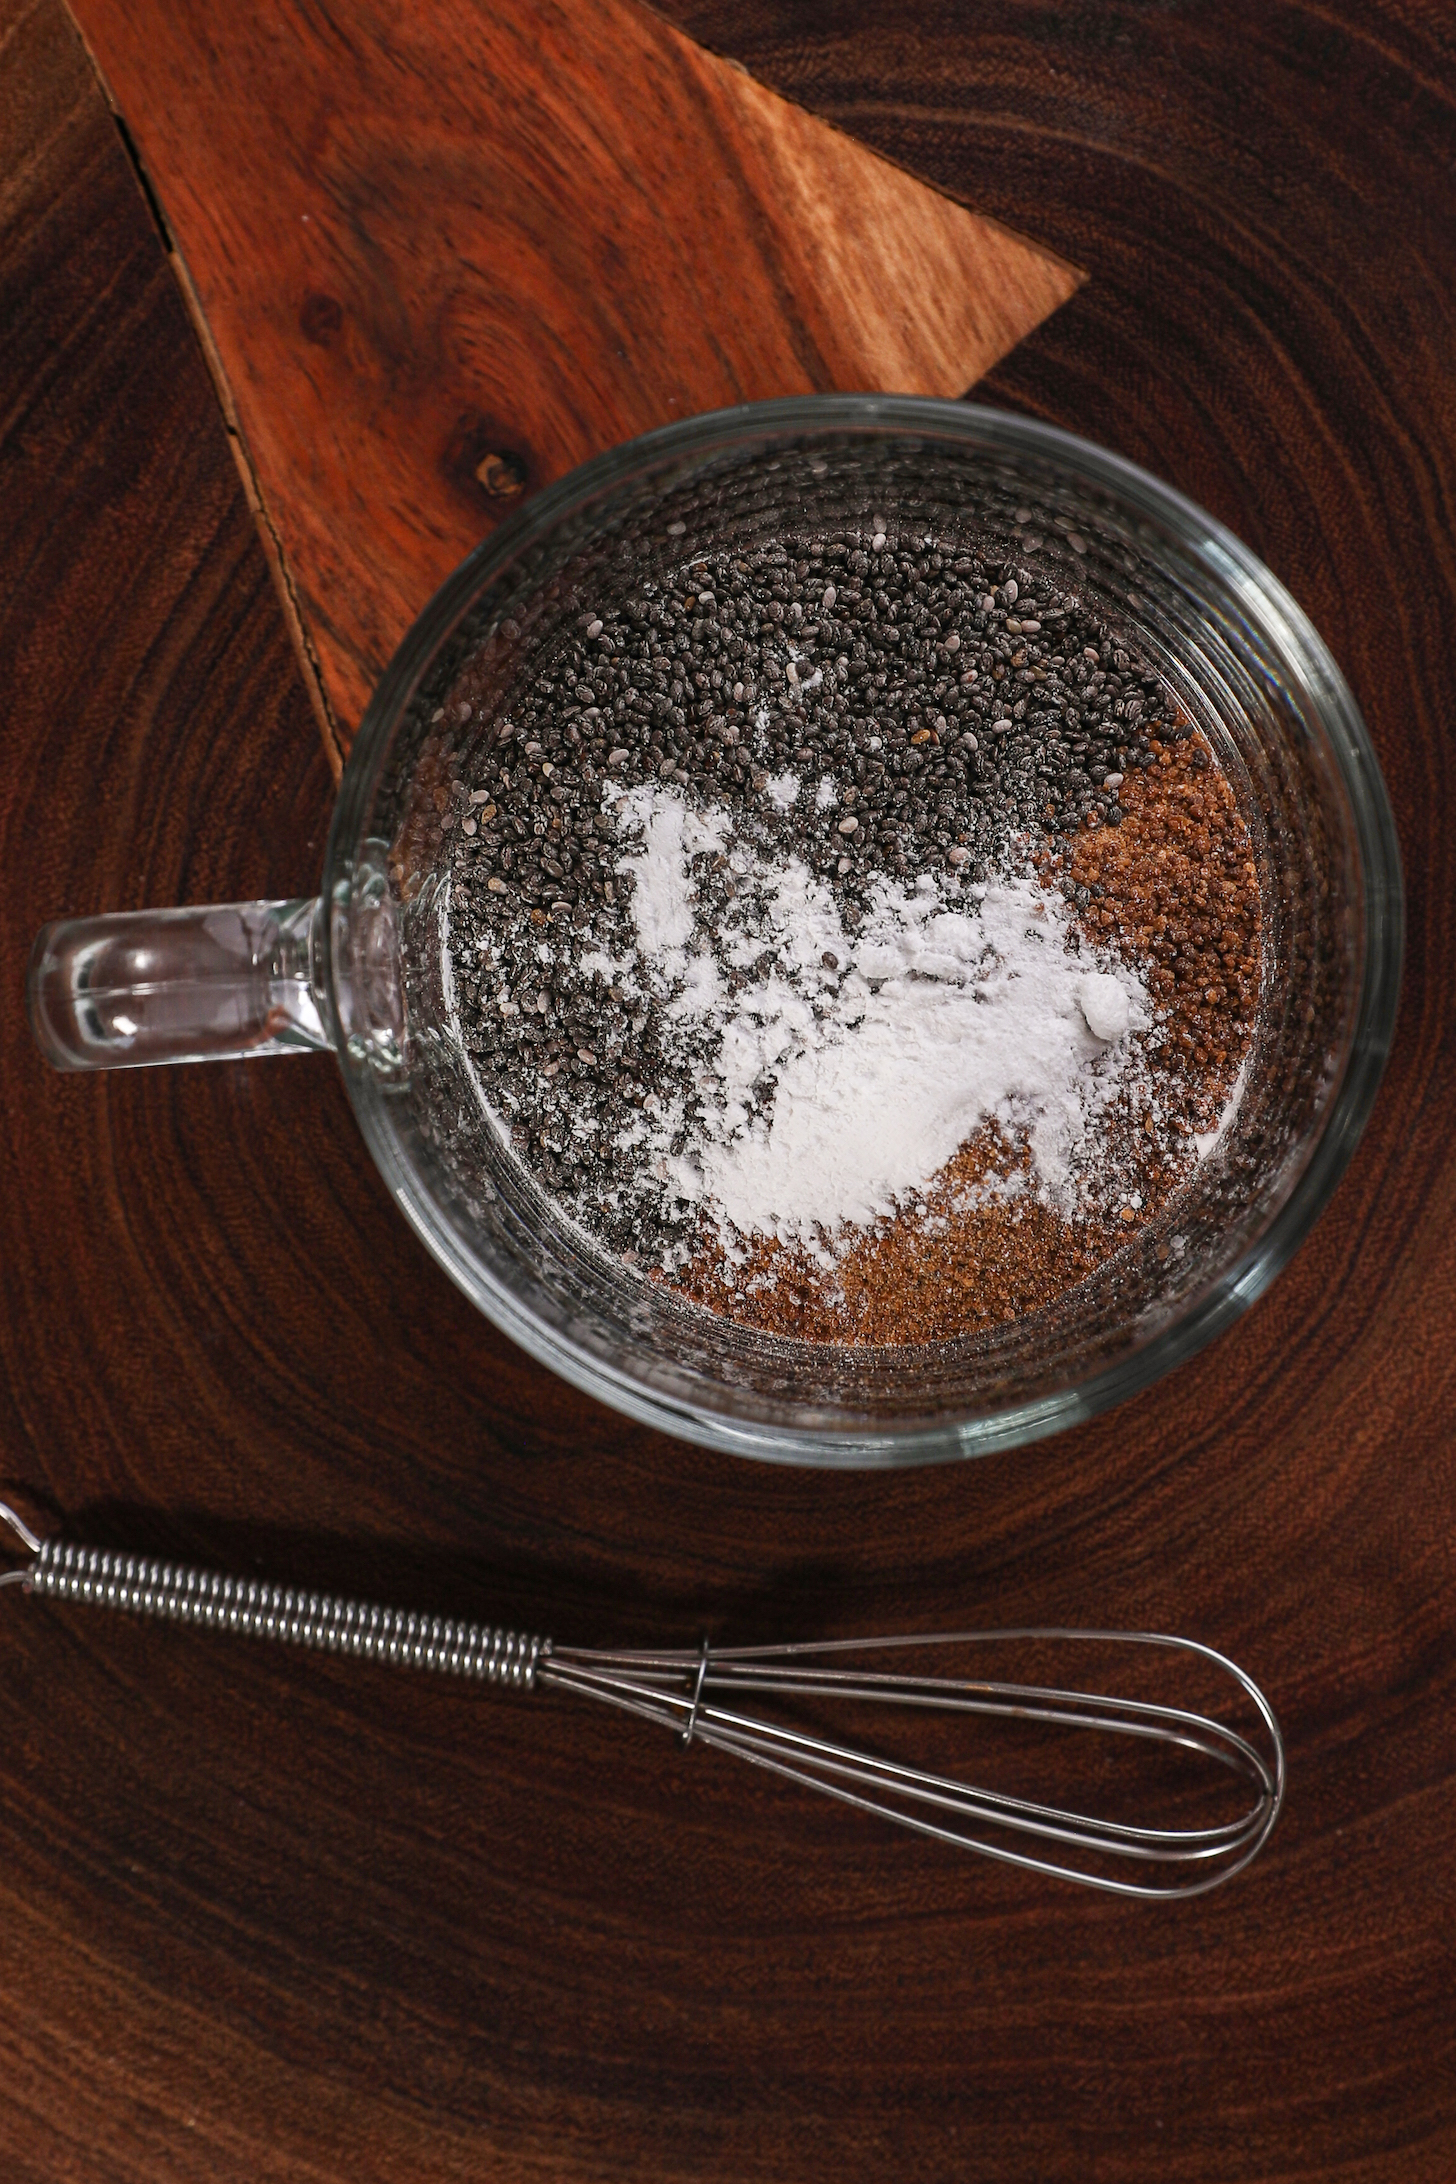 A mug with seeds and cocoa as well as a white powder with a small whisk beside the mug.